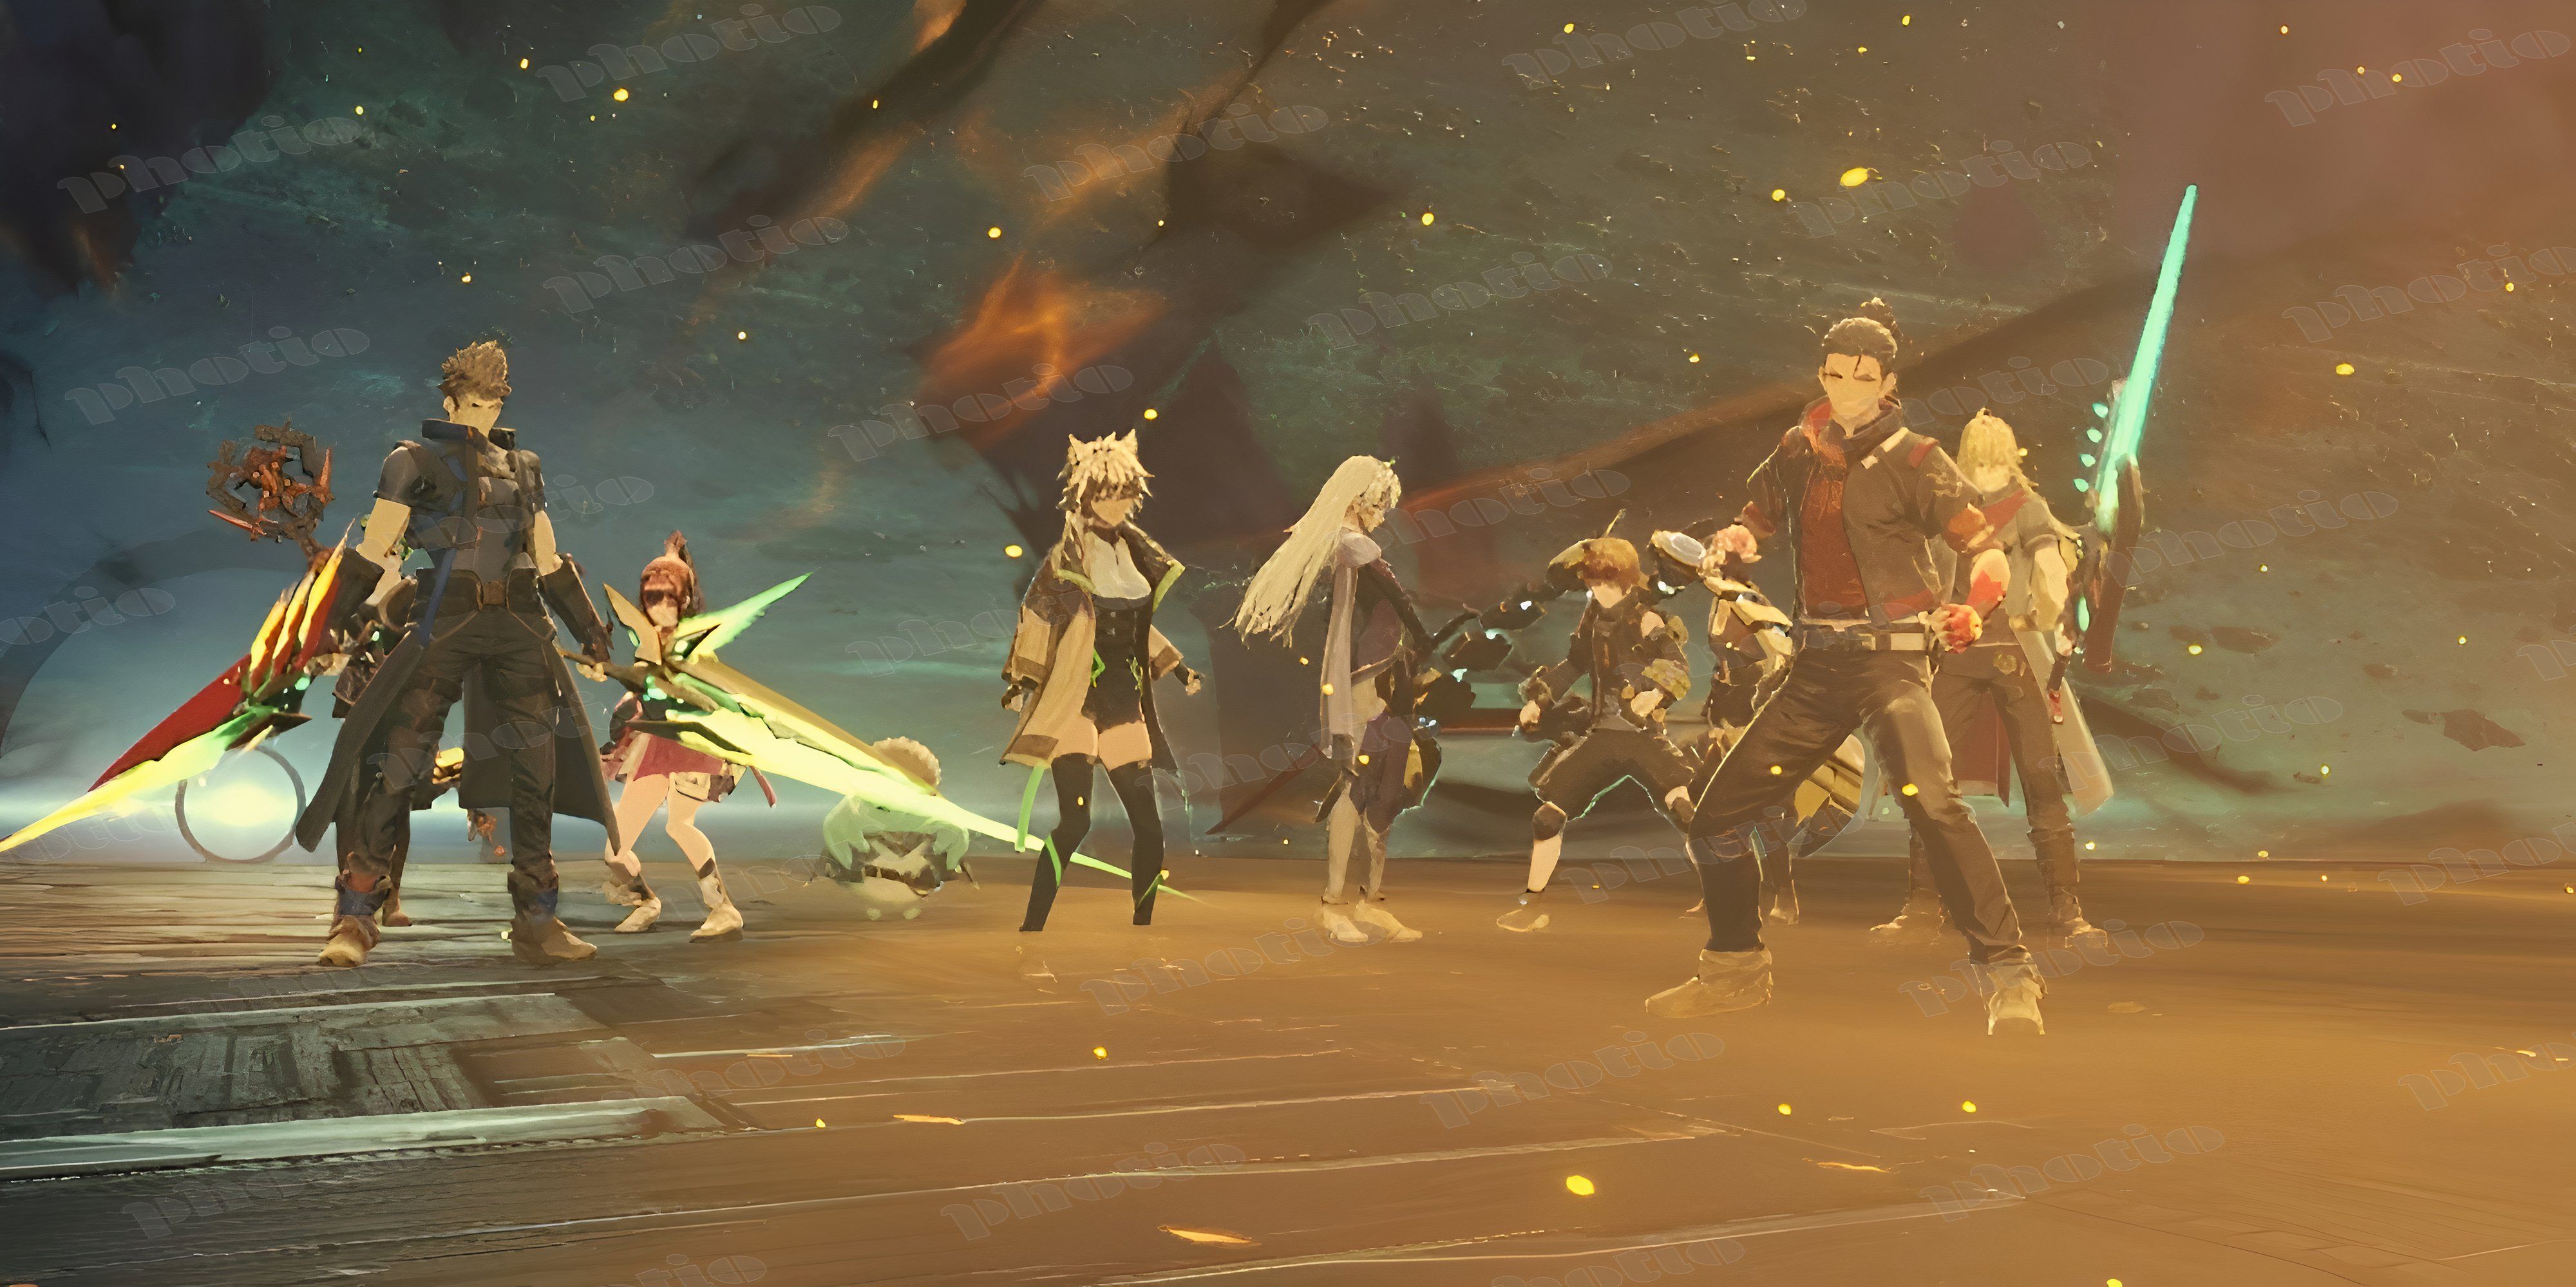 Matthew, Rex, Shulk, and the gang get ready to fight for the Future in Xenoblade Chronicles 3 Future Redeemed